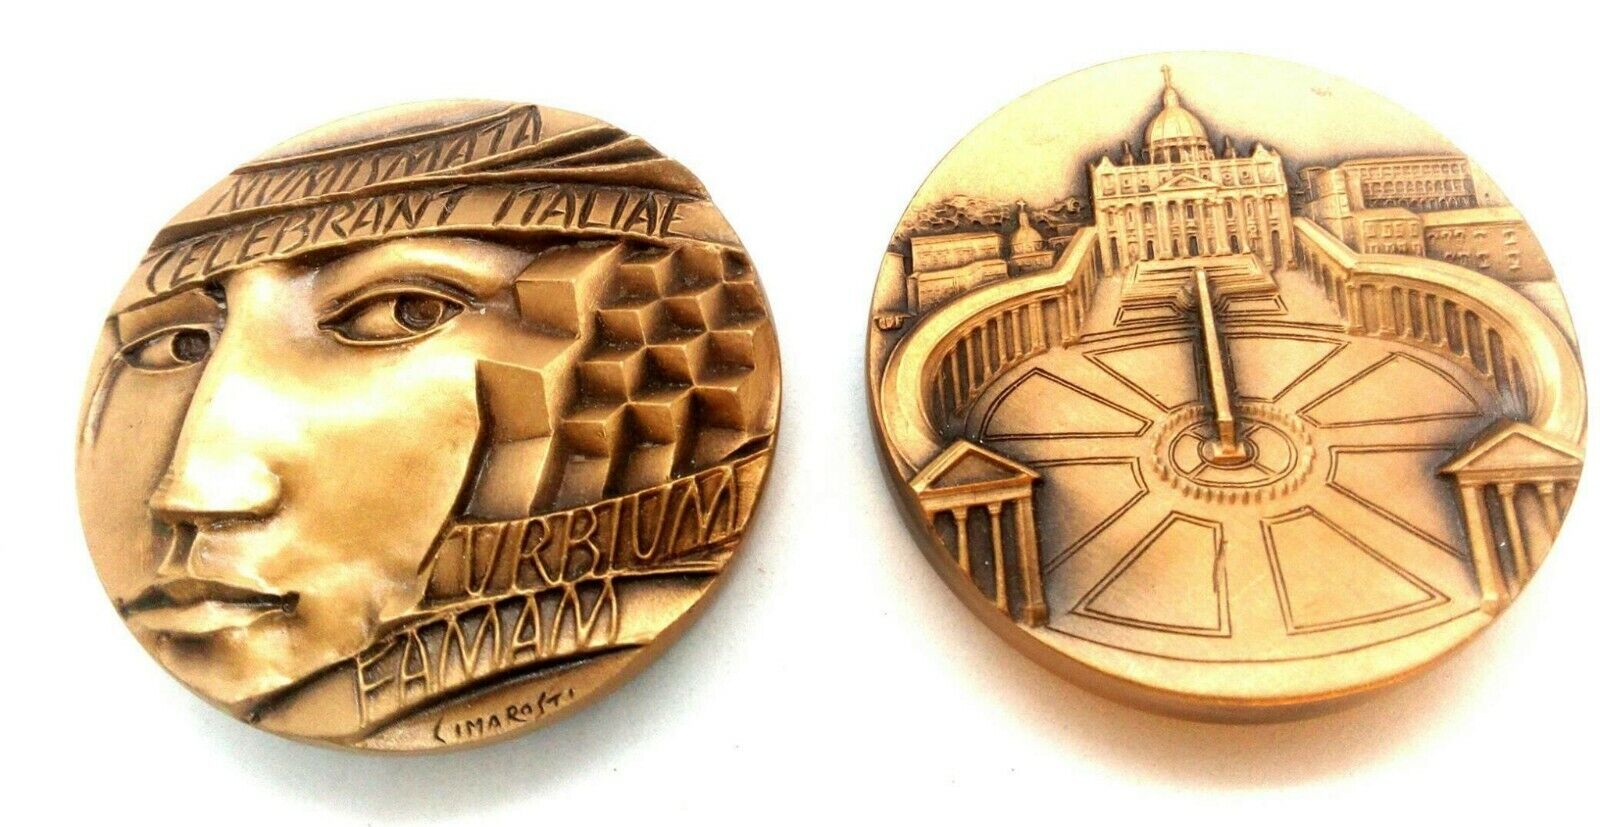 St. Peter's Square Collectible Bronze Medal, Made in Milan,Italy w/Free Postcard